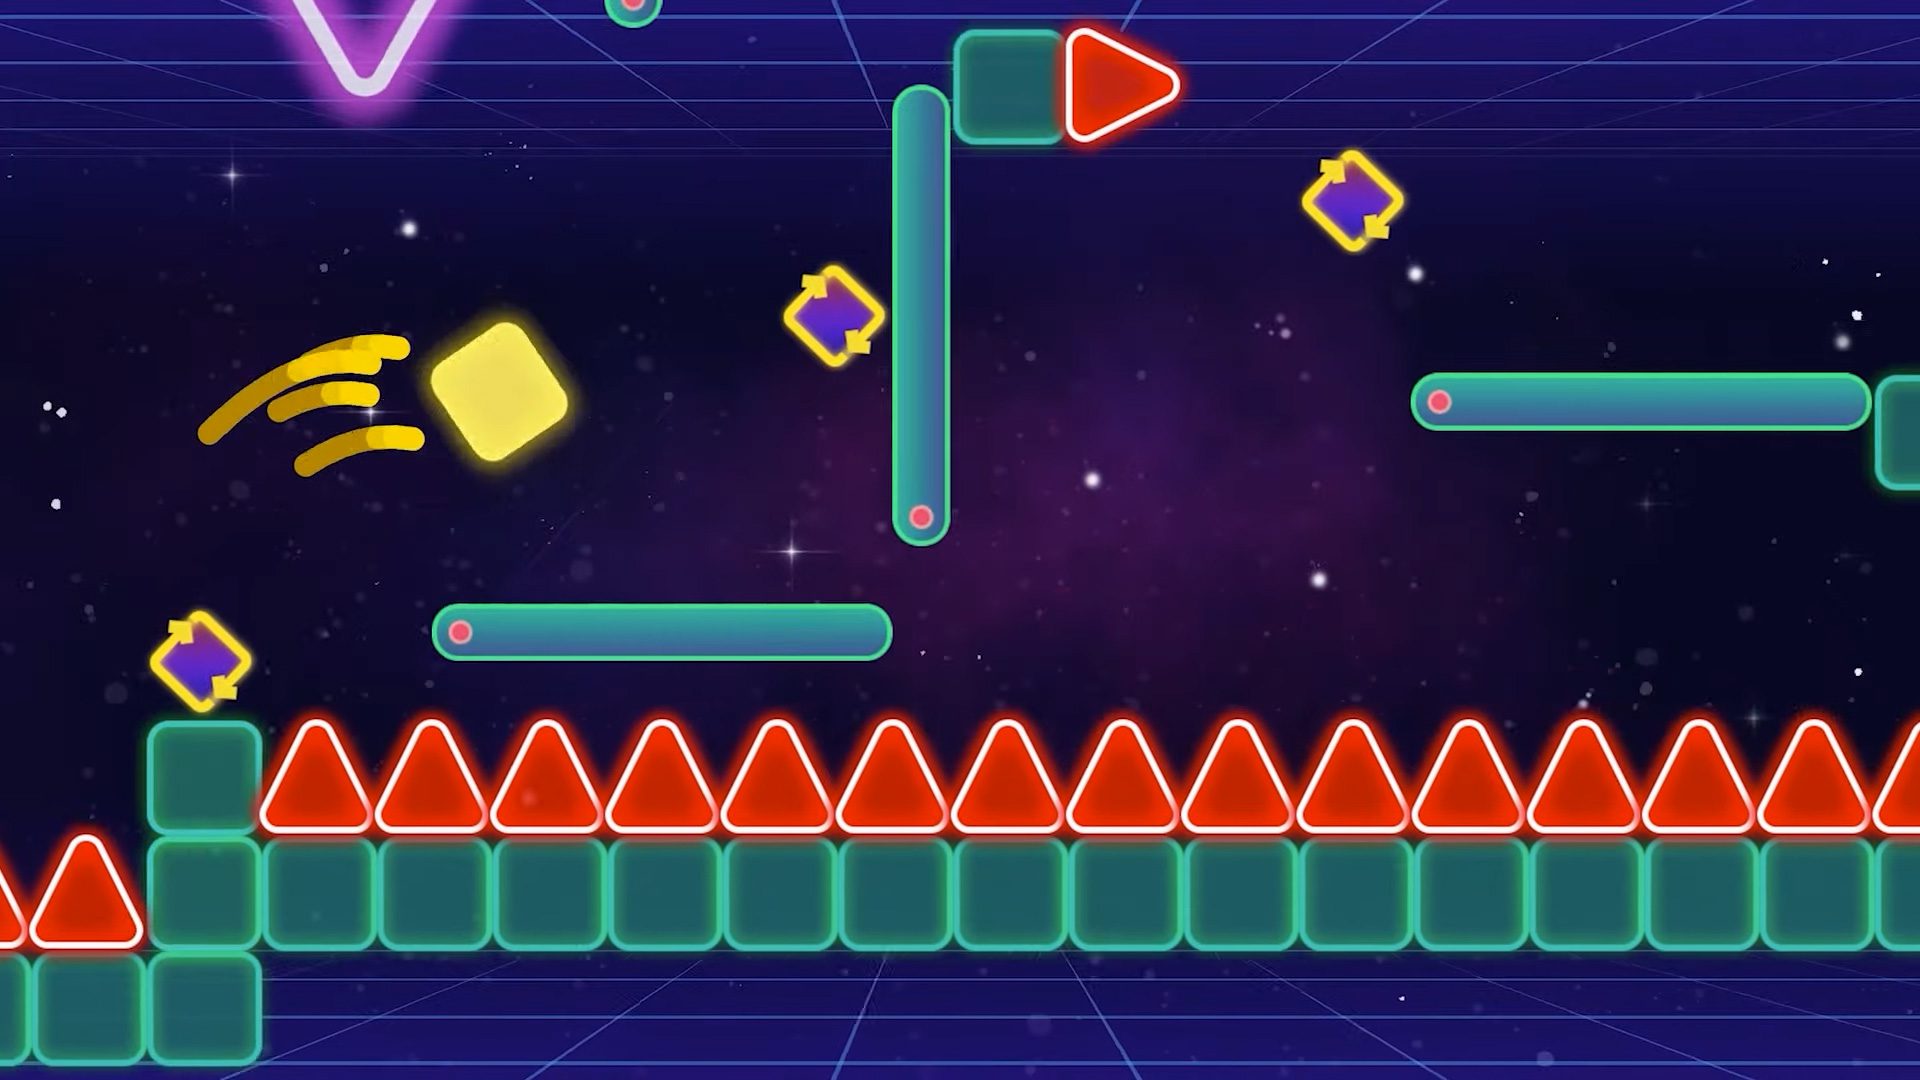 NOT SO IMPOSSIBLE GAME  Geometry Dash 